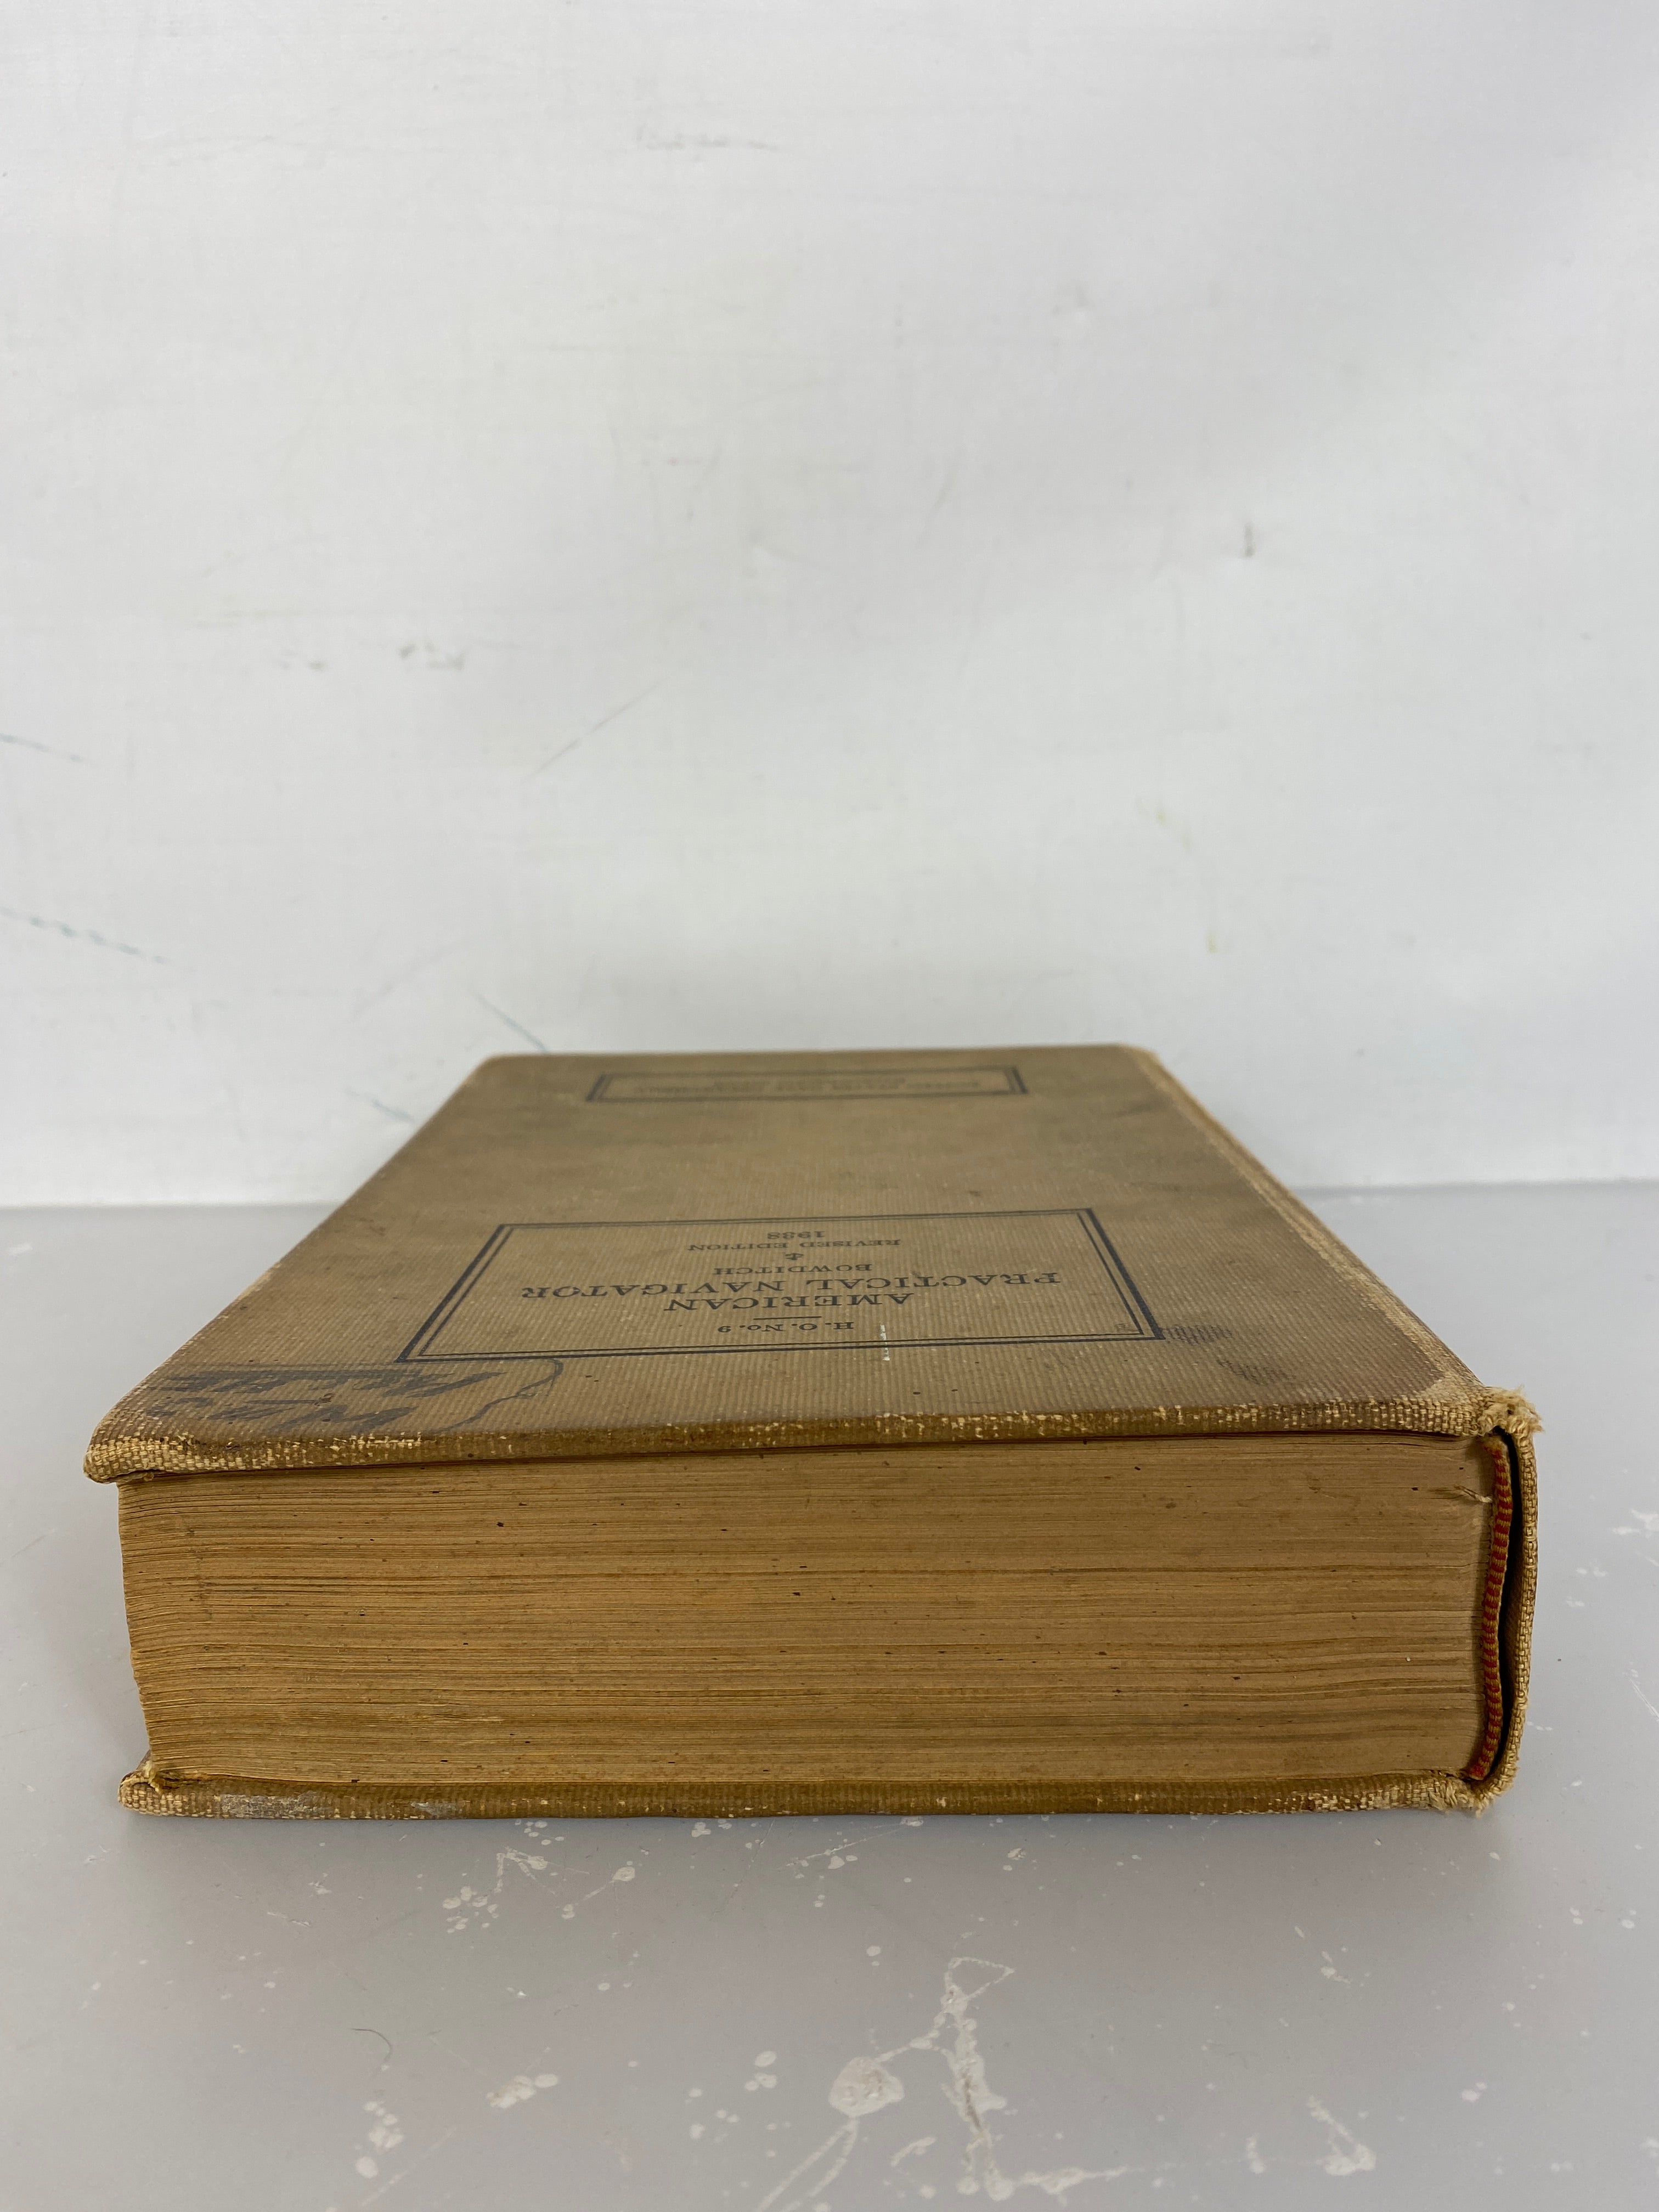 American Practical Navigator U.S. Government Printing Office Revised 1939 HC